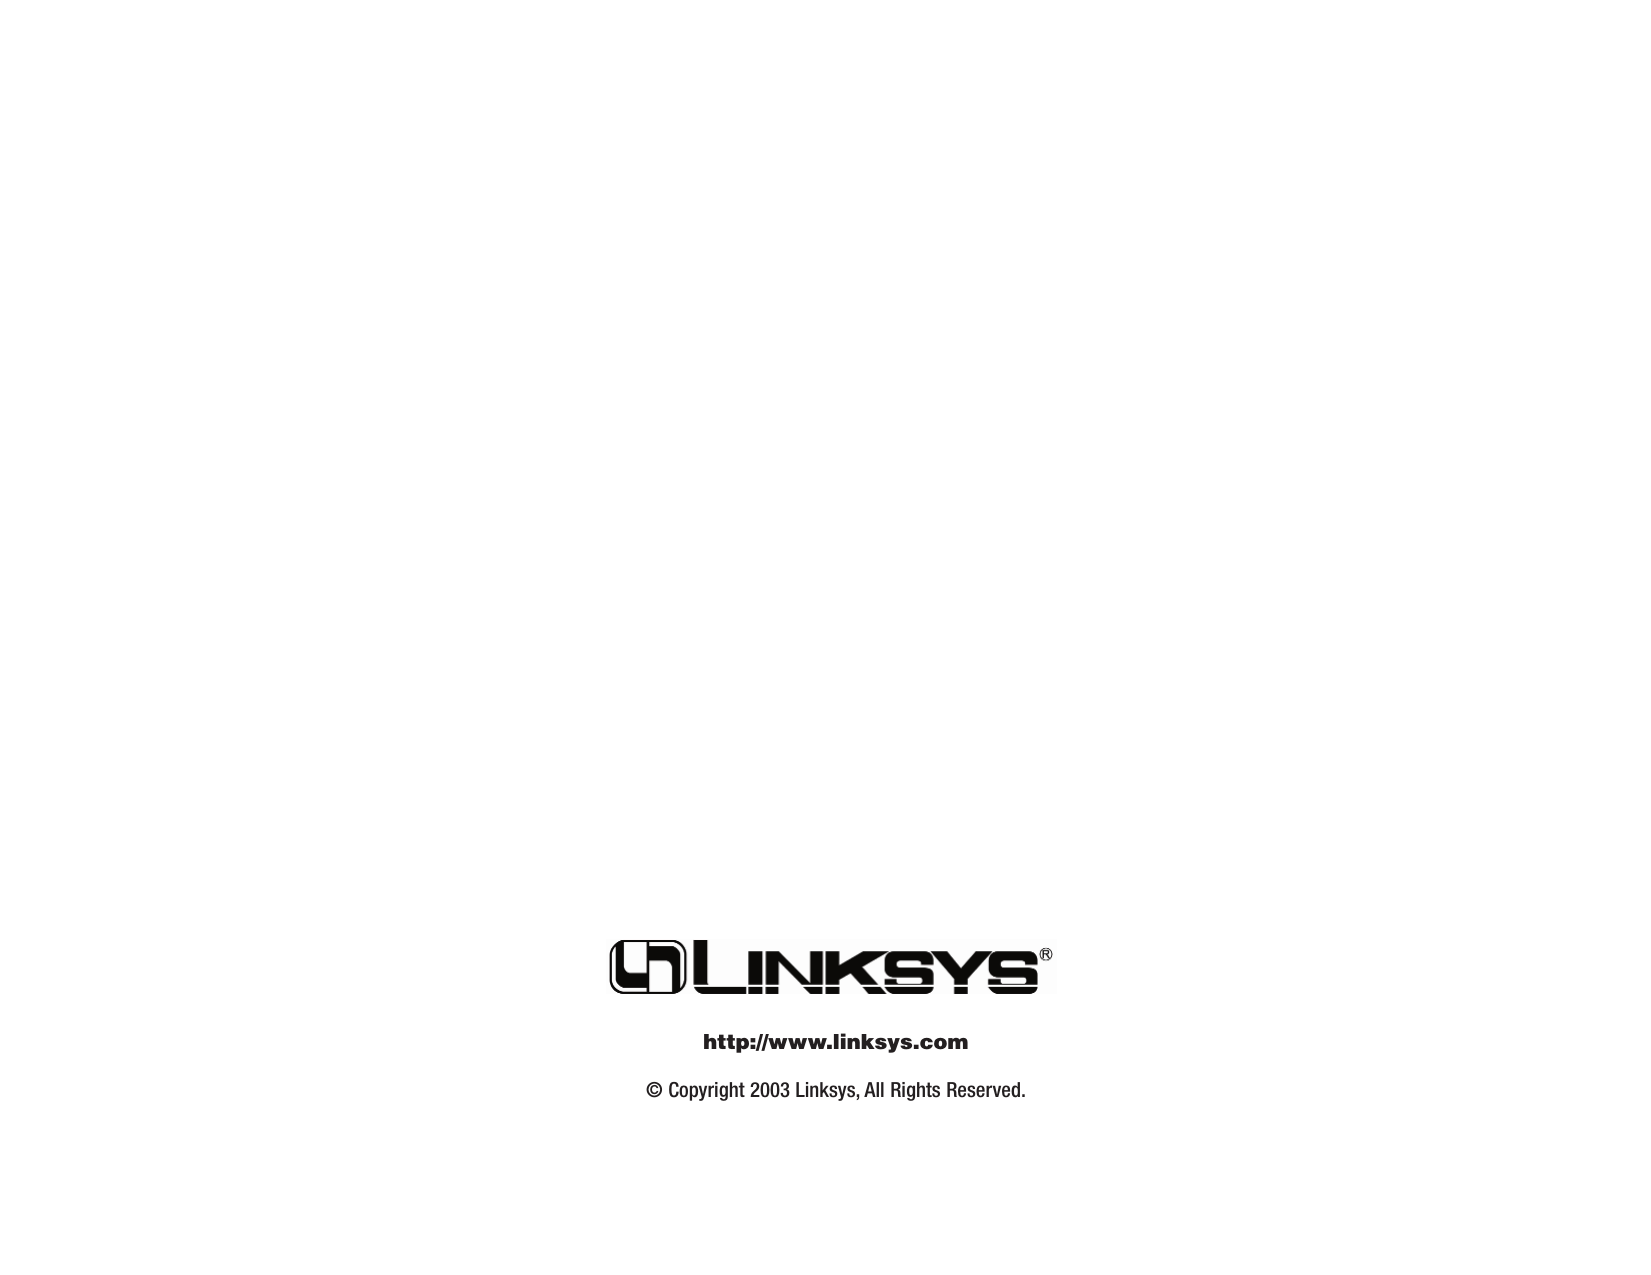 © Copyright 2003 Linksys, All Rights Reserved.http://www.linksys.com